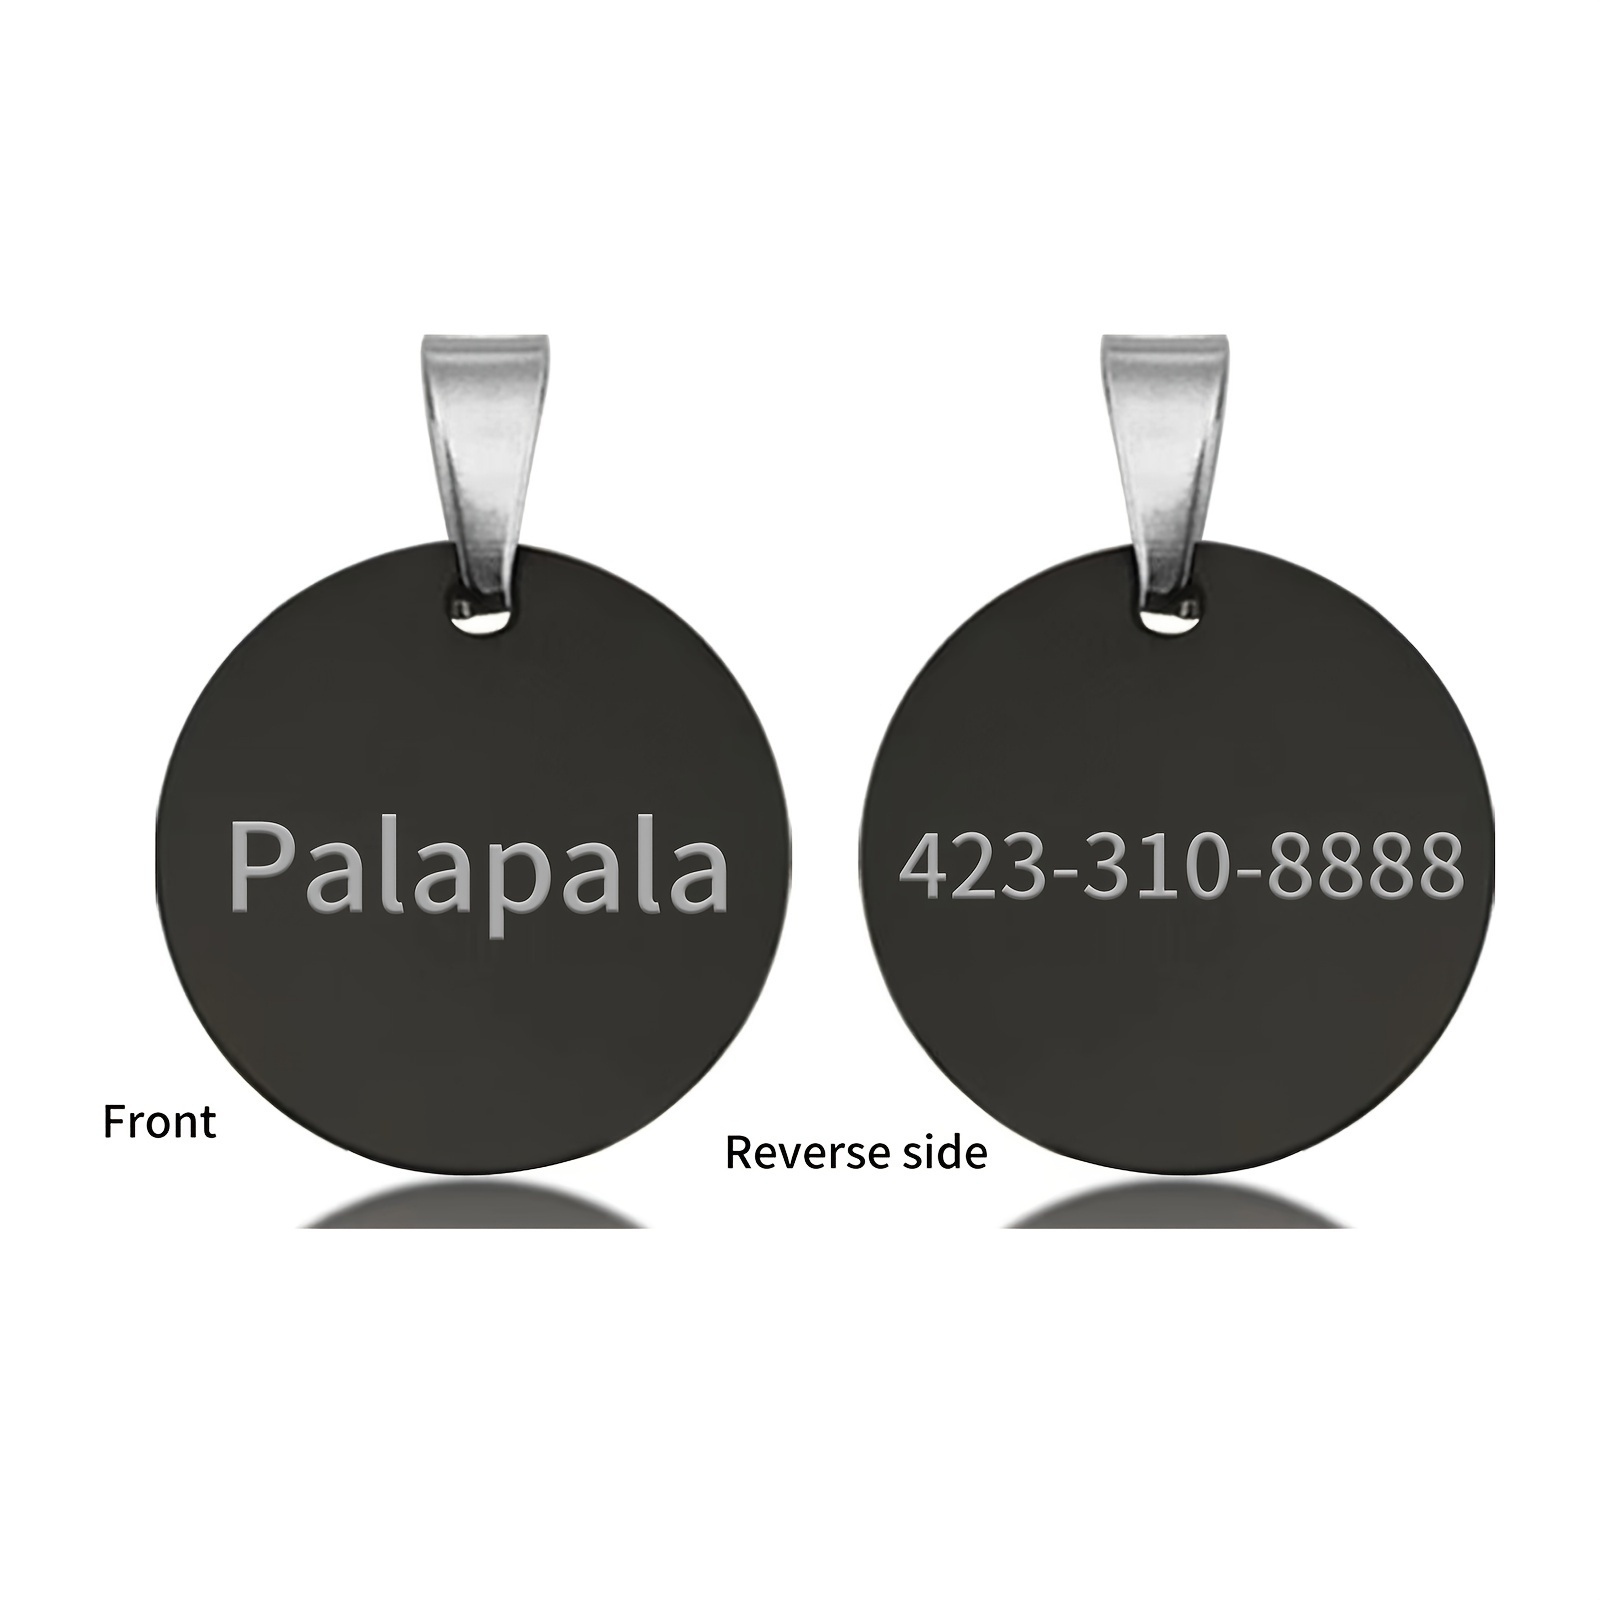 

Personalized Bone Shaped Pet Id Tags With Customized Contact Information And Pet Names - Stylish Lettering Design For Easy Identification And Safety